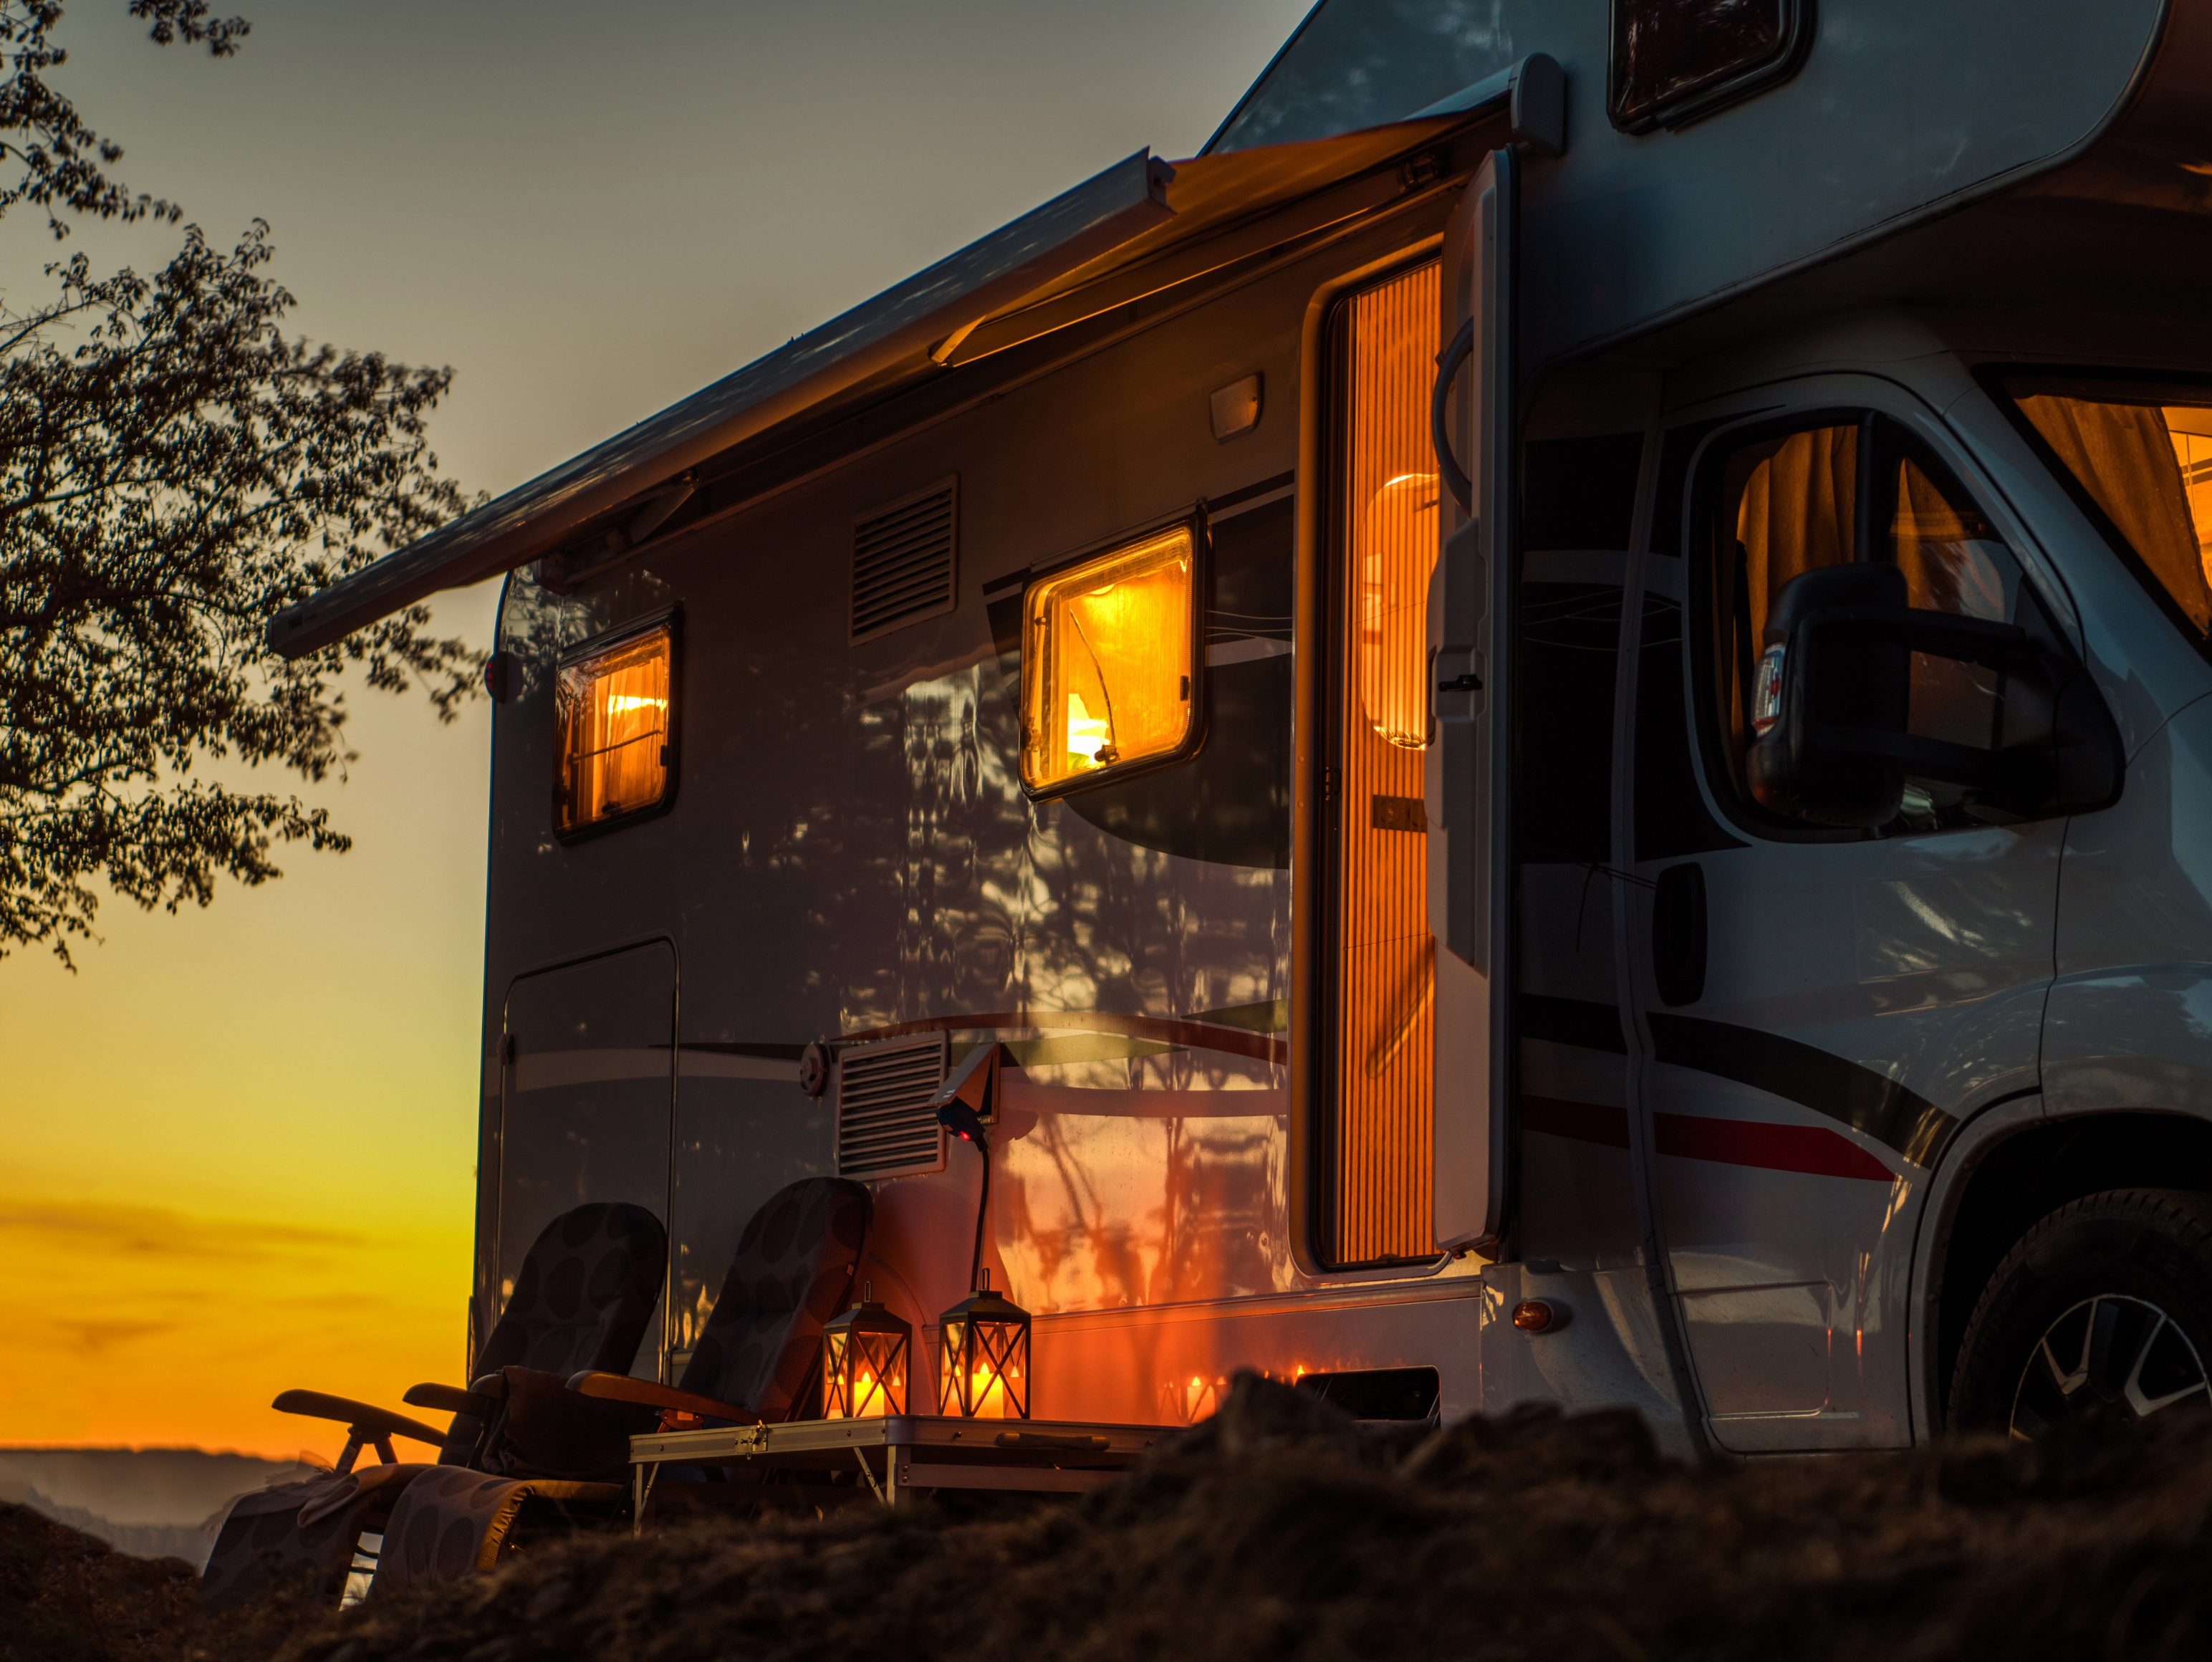 A Beginner's Guide: 5 Quick Tips For Traveling By an RV